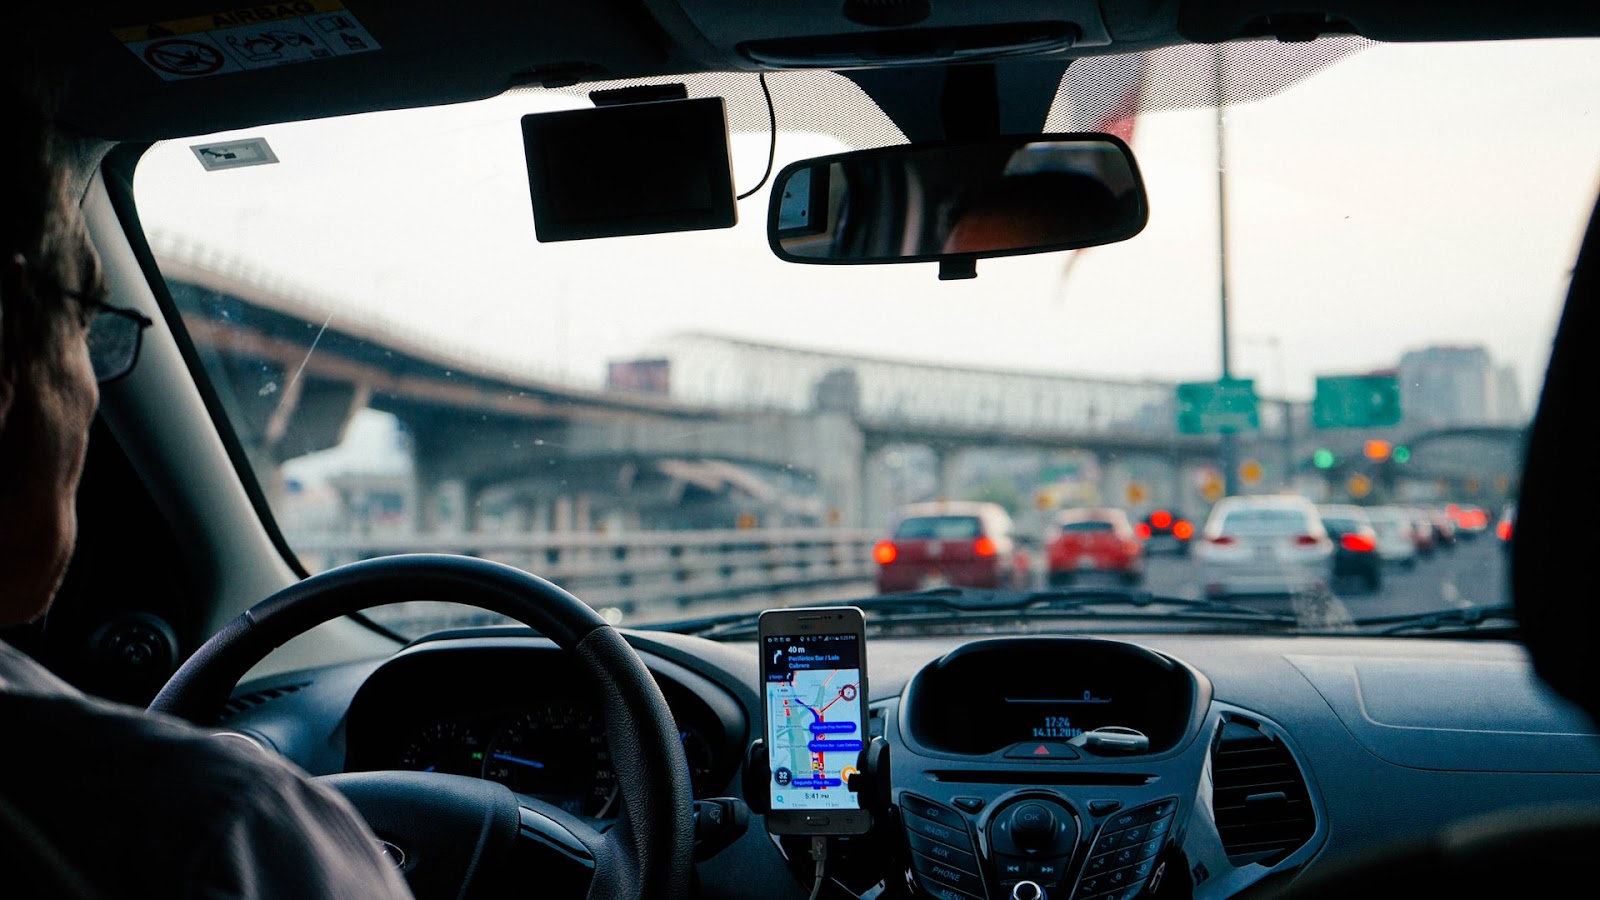 Biggest data breaches: An Uber driver, with directions on their phone, stuck in traffic